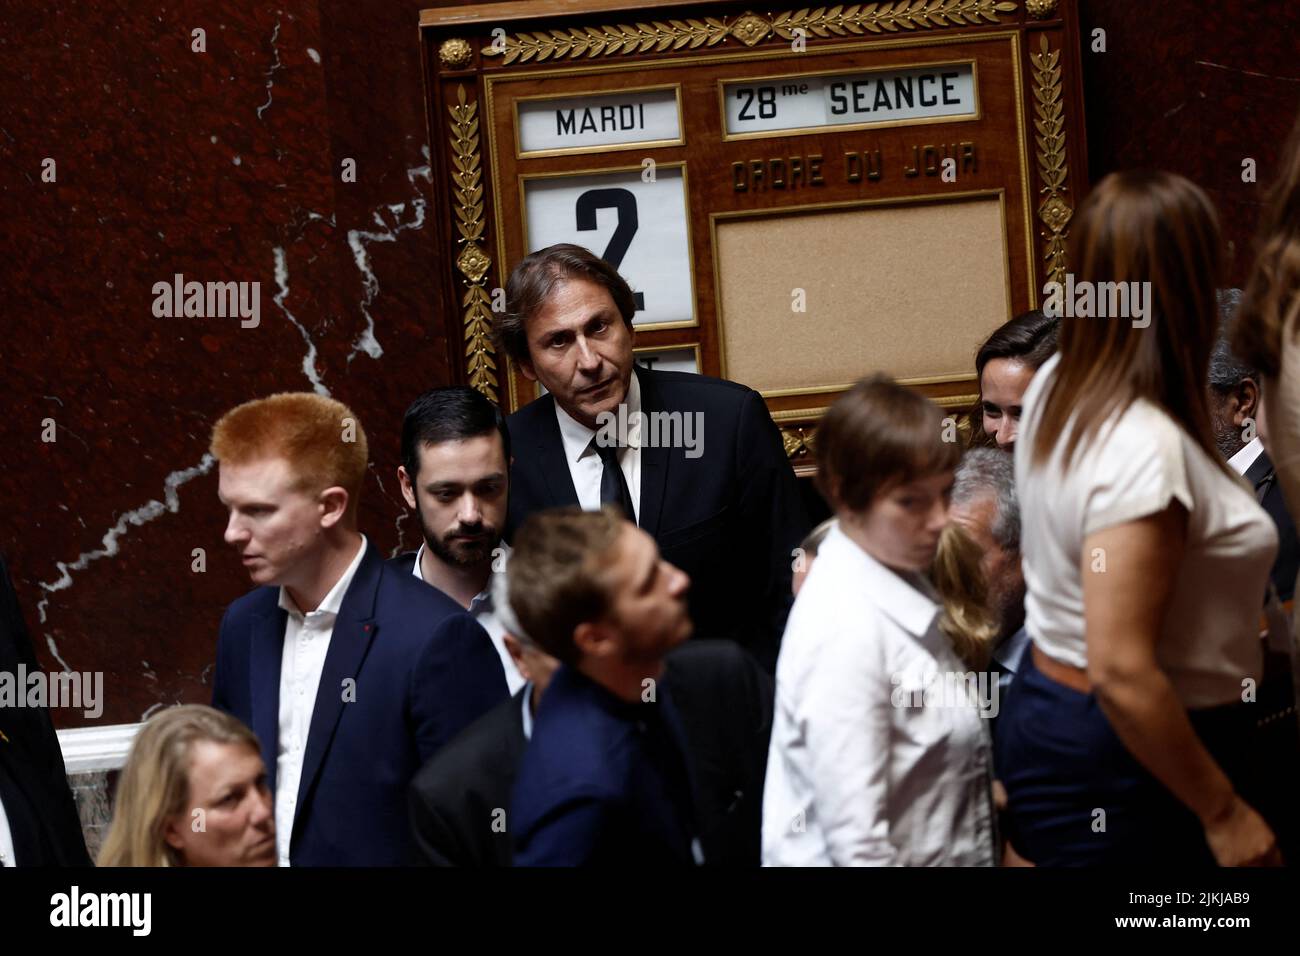 Members of parliament of French far-left opposition party La France Insoumise (France Unbowed) and the left-wing coalition NUPES, including Jerome Guedj, come back to their seats after they left during the questions to the government session at the National Assembly in Paris, France, August 2, 2022. REUTERS/Benoit Tessier Stock Photo